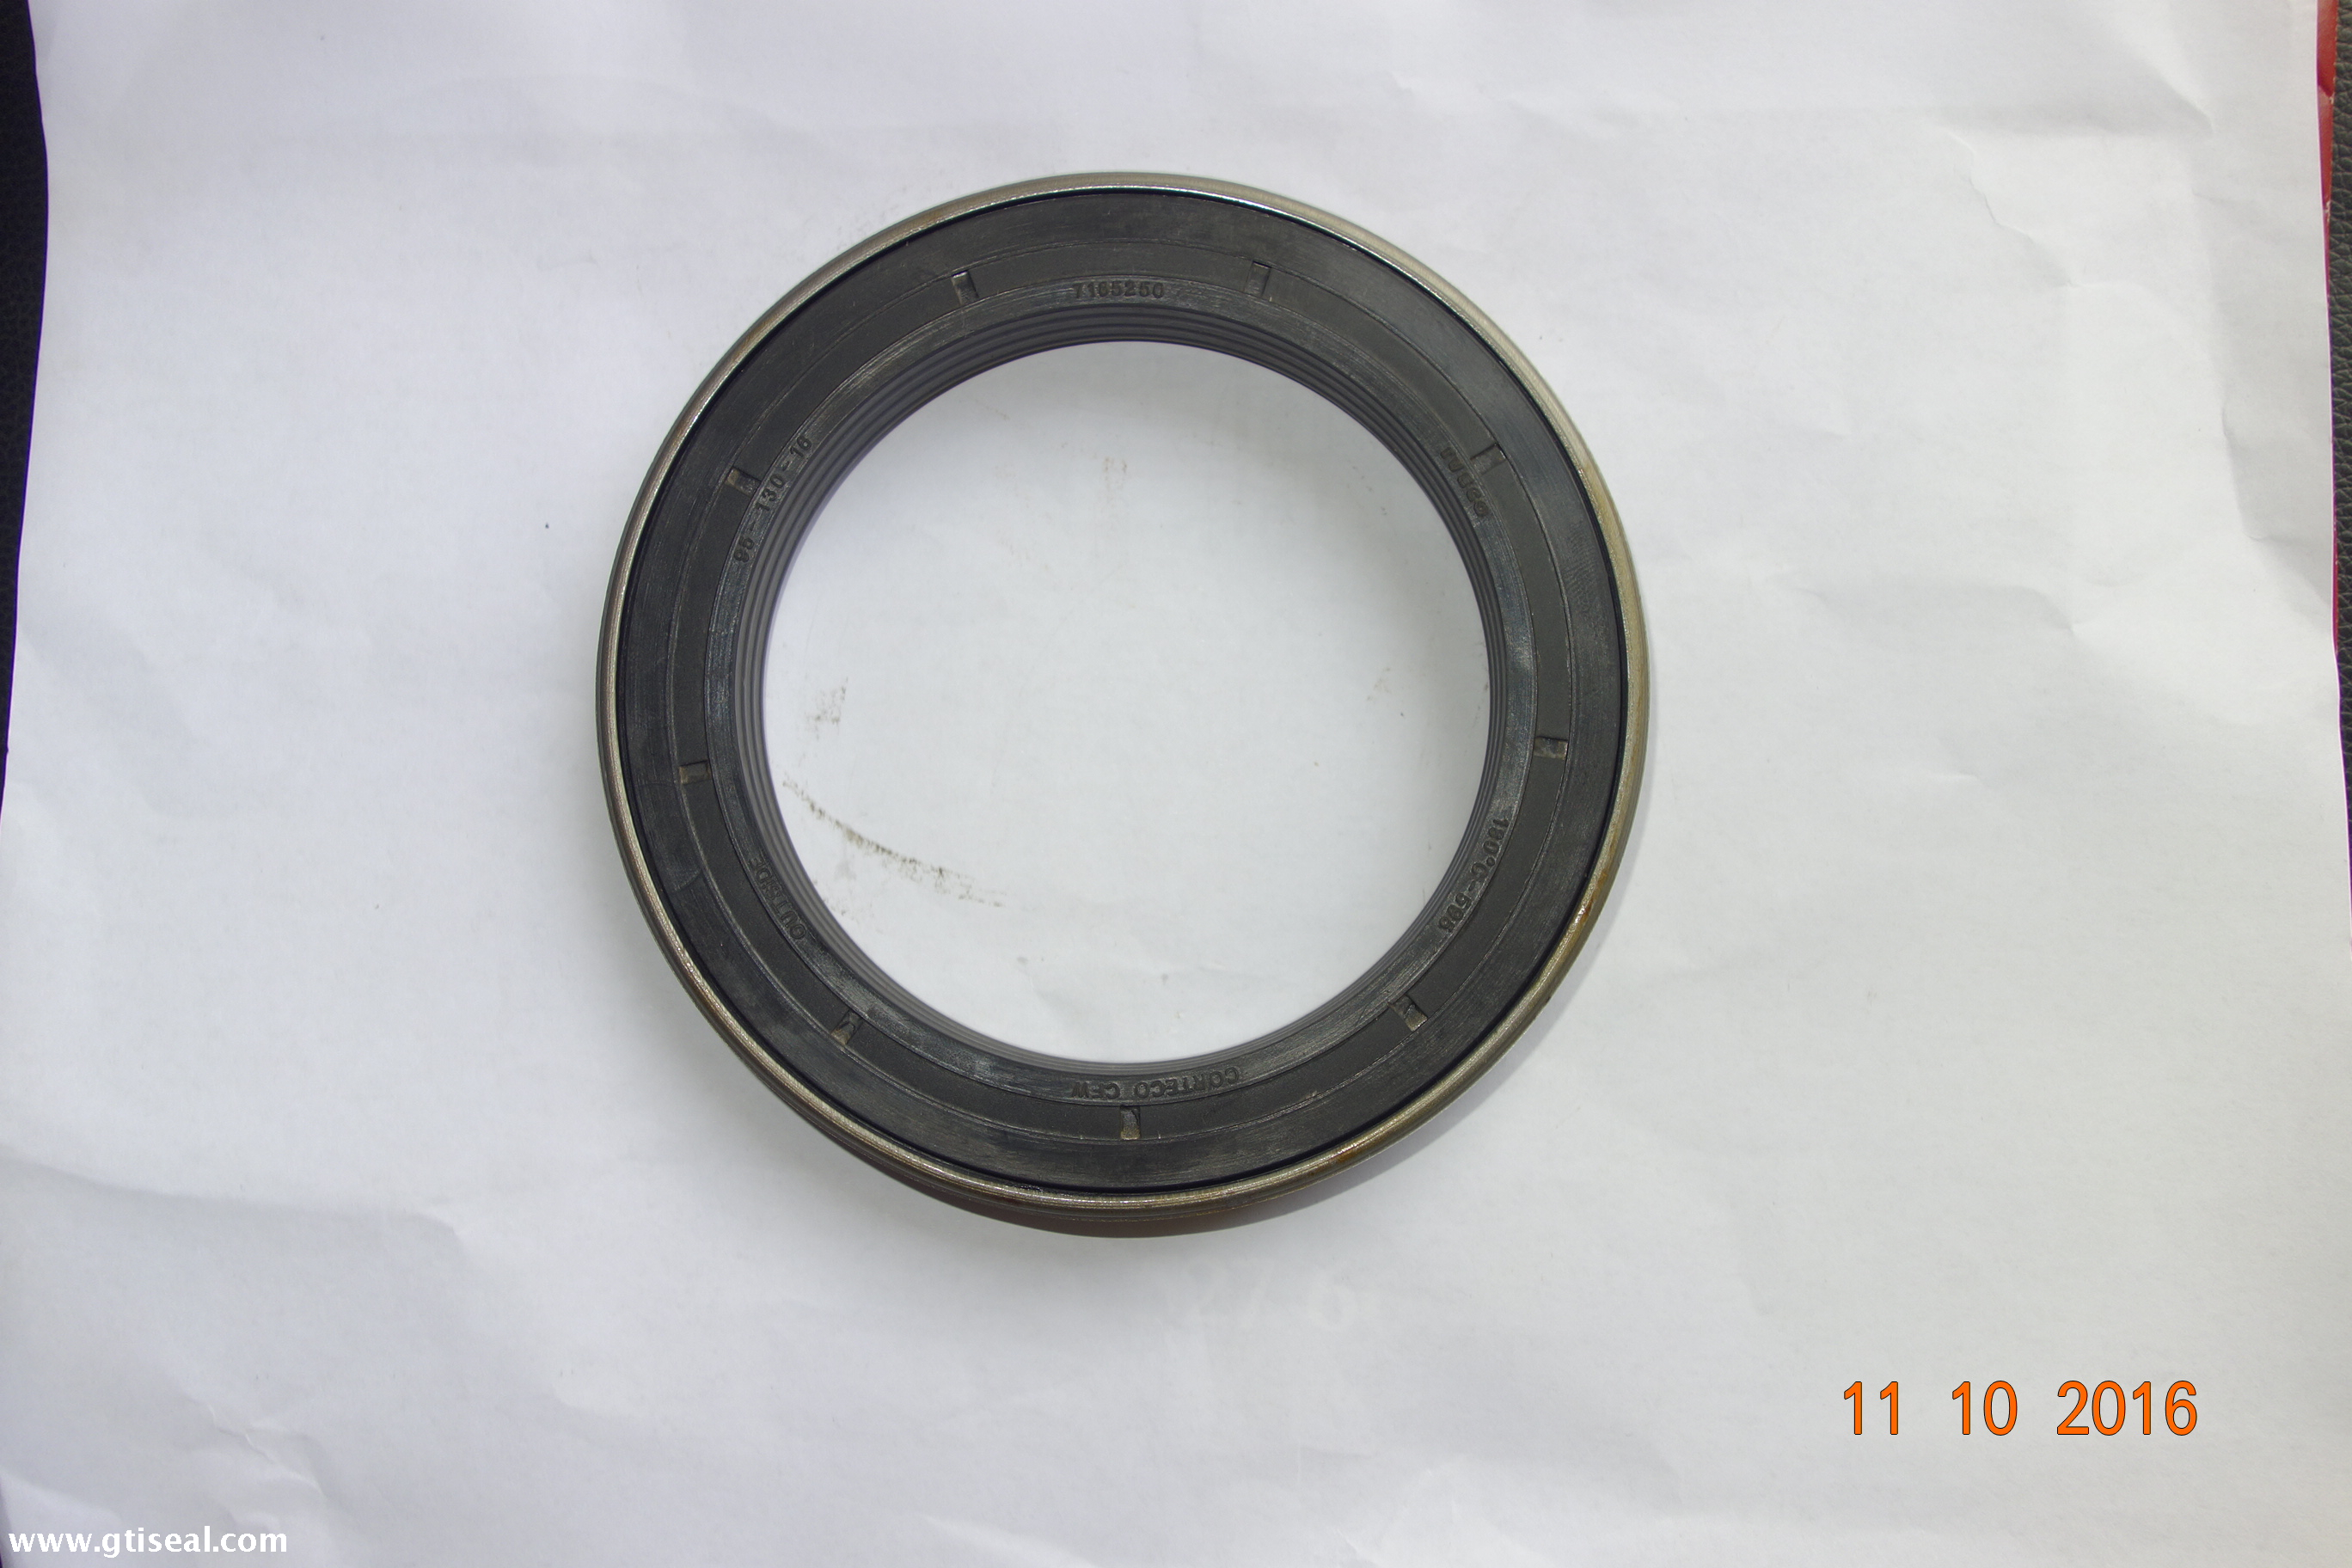 Tractor part Crankshaft Rear End Oil Seal For Tractor 2418F475 weltake WMM brand